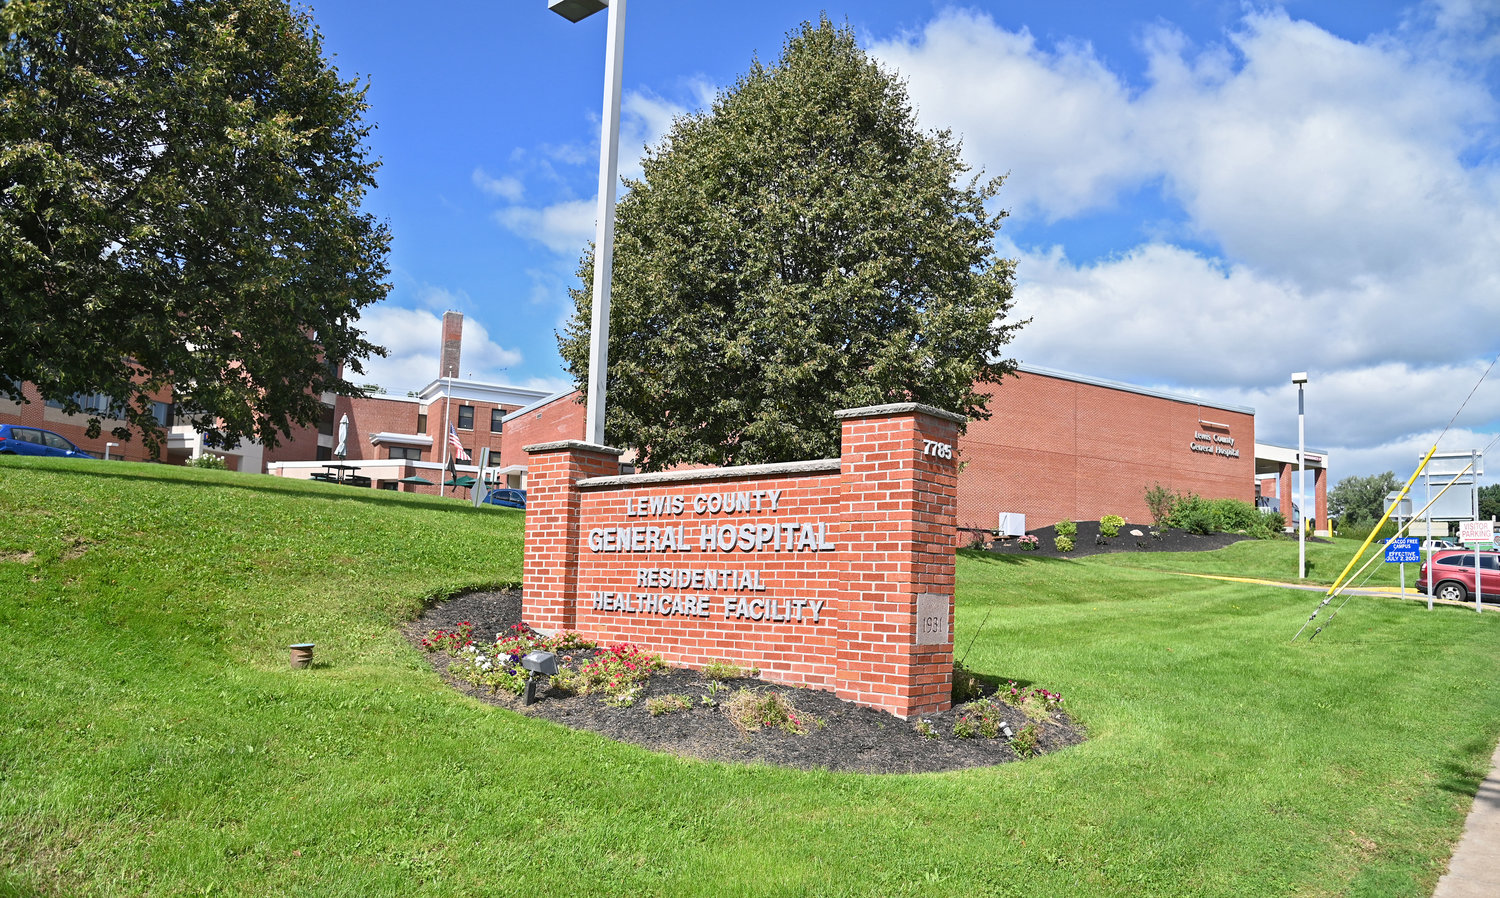 RECEIVING FUNDING — Lewis County General Hospital, shown here in a file photo, will receive $1 million in a Rural Development grant, according to an announcement Wednesday by Rep. Elise Stefanik, R-21, Schuylerville.